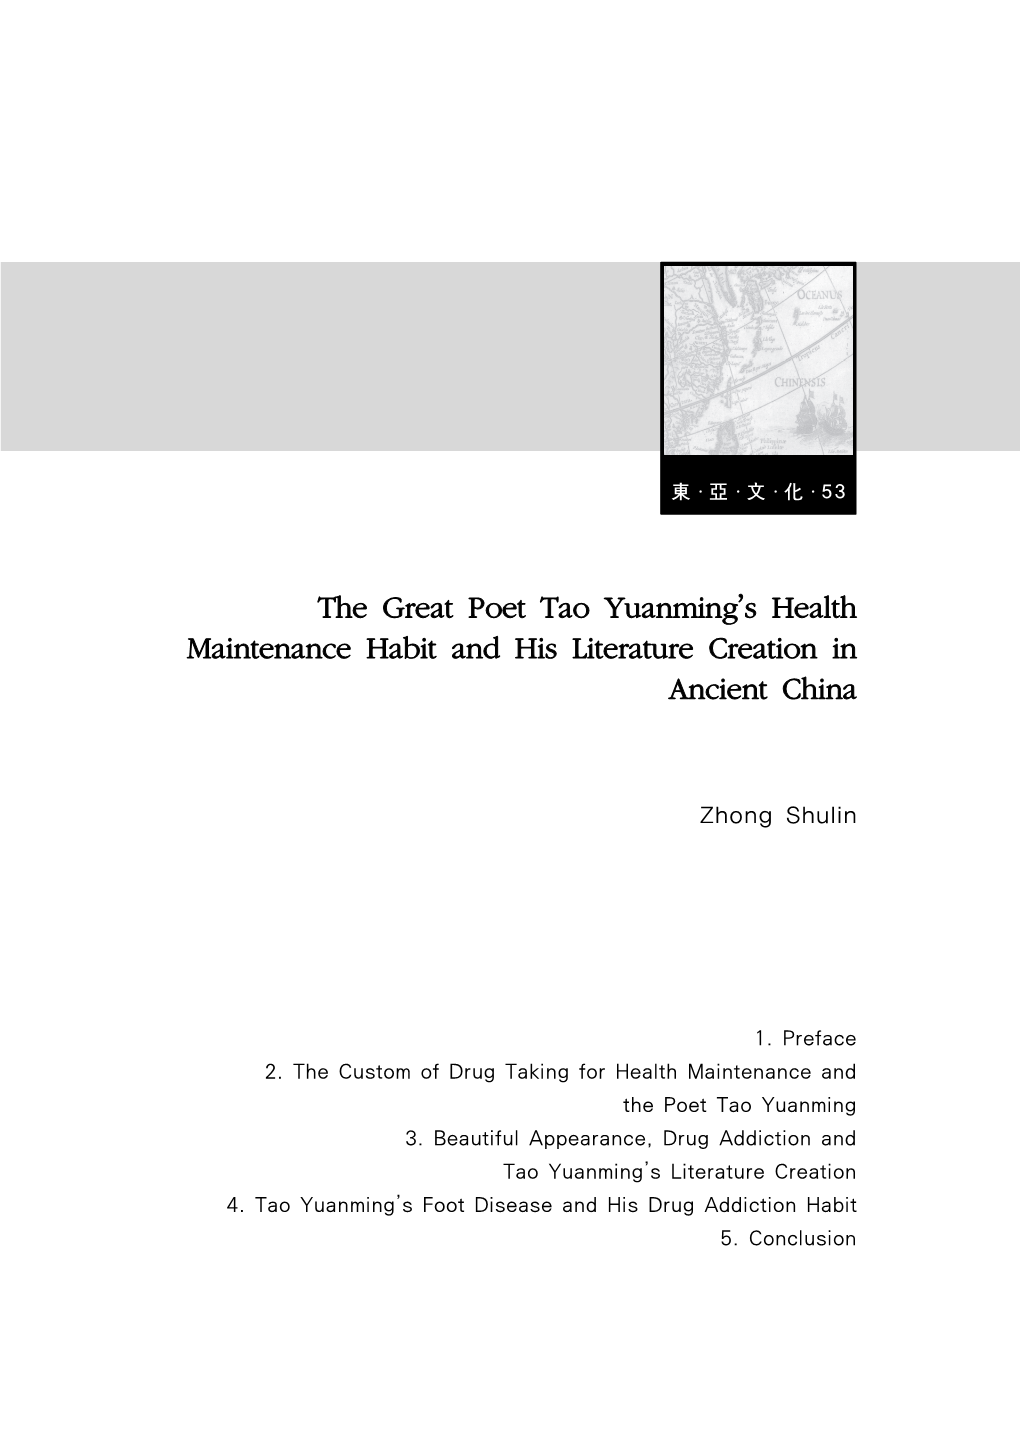 The Great Poet Tao Yuanming's Health Maintenance Habit and His Literature Creation in Ancient China